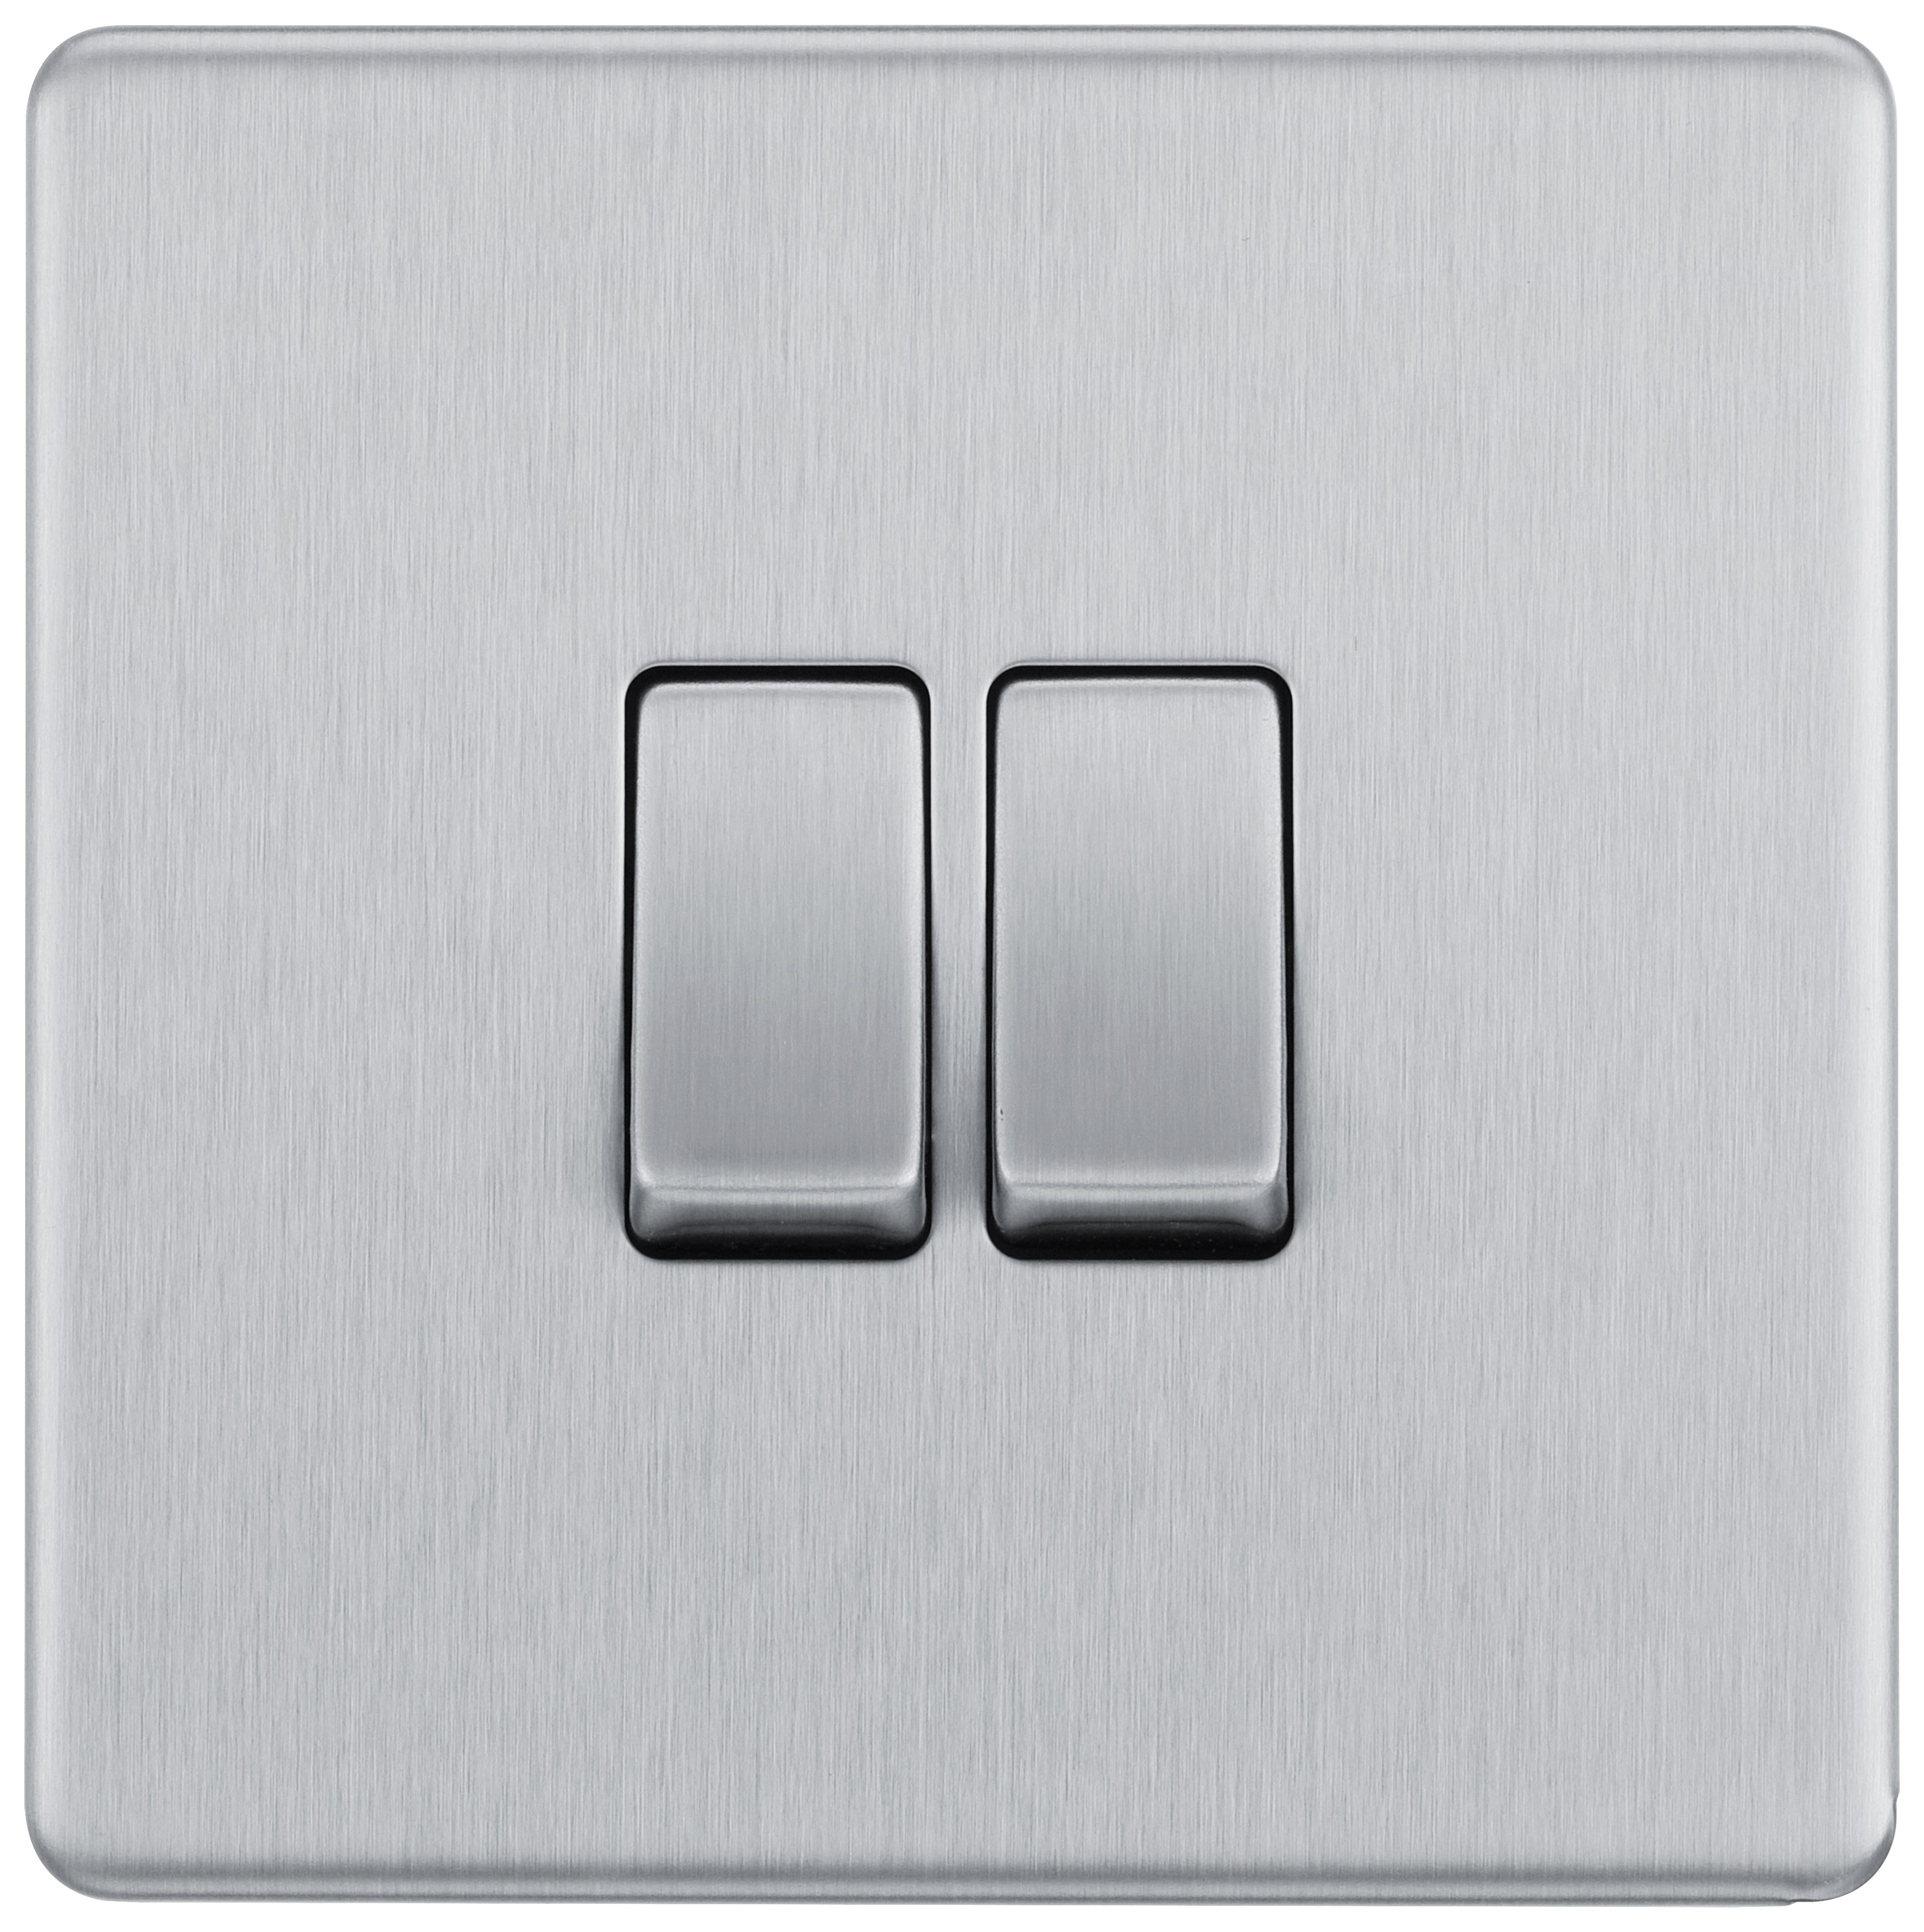 Image of BG Screwless Flatplate Brushed Steel Double Switch 10Ax 2 Way